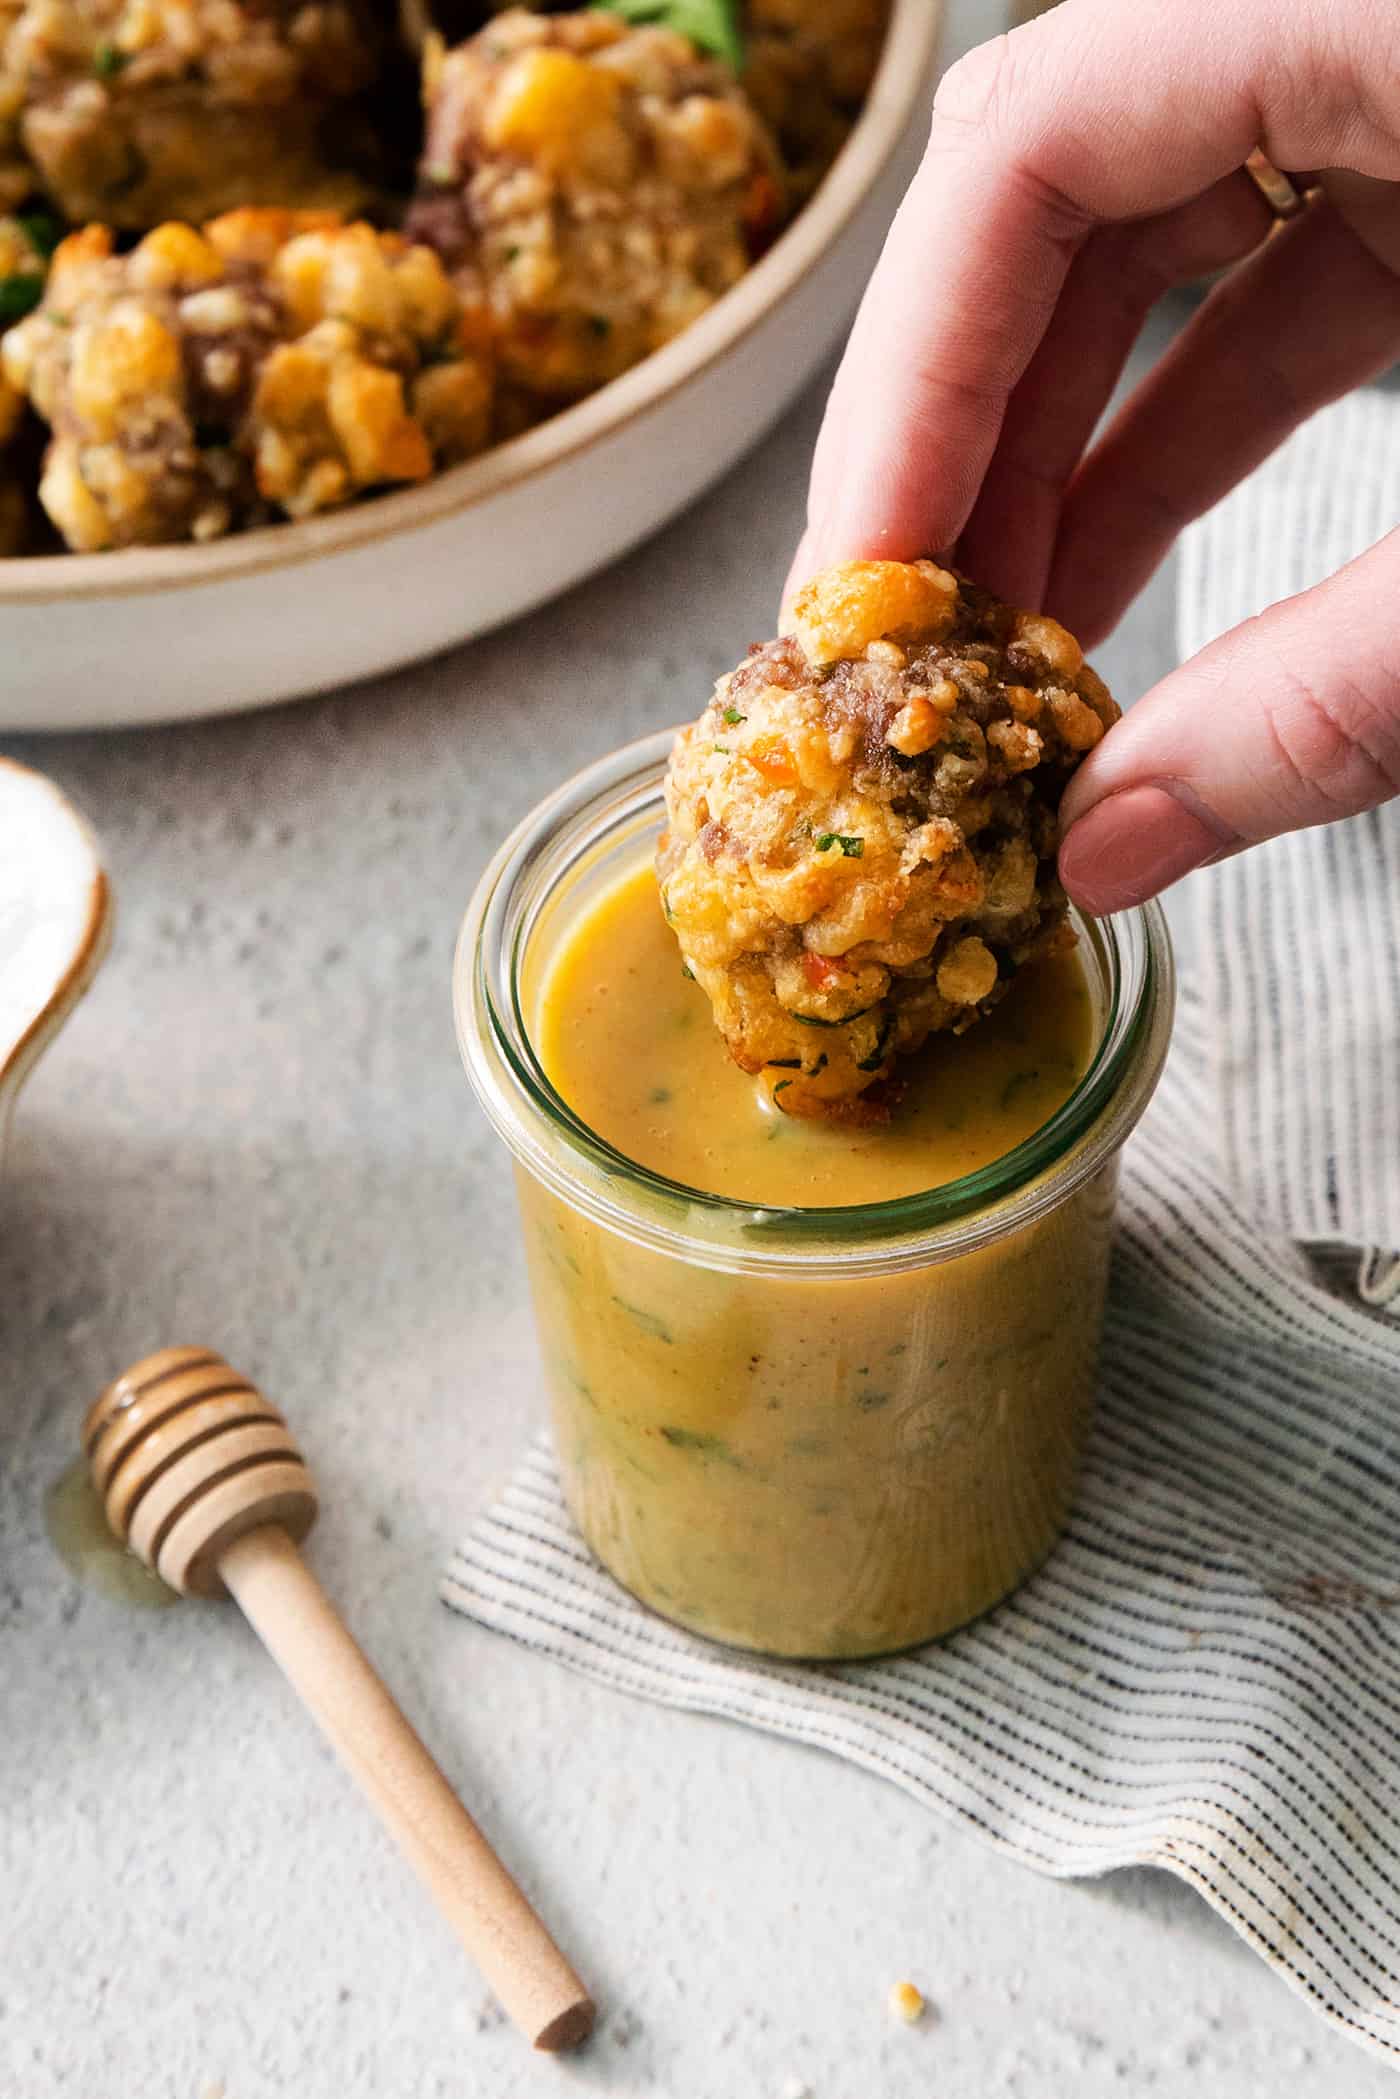 A sausage cheese ball is dipped into a jar or honey mustard dip.